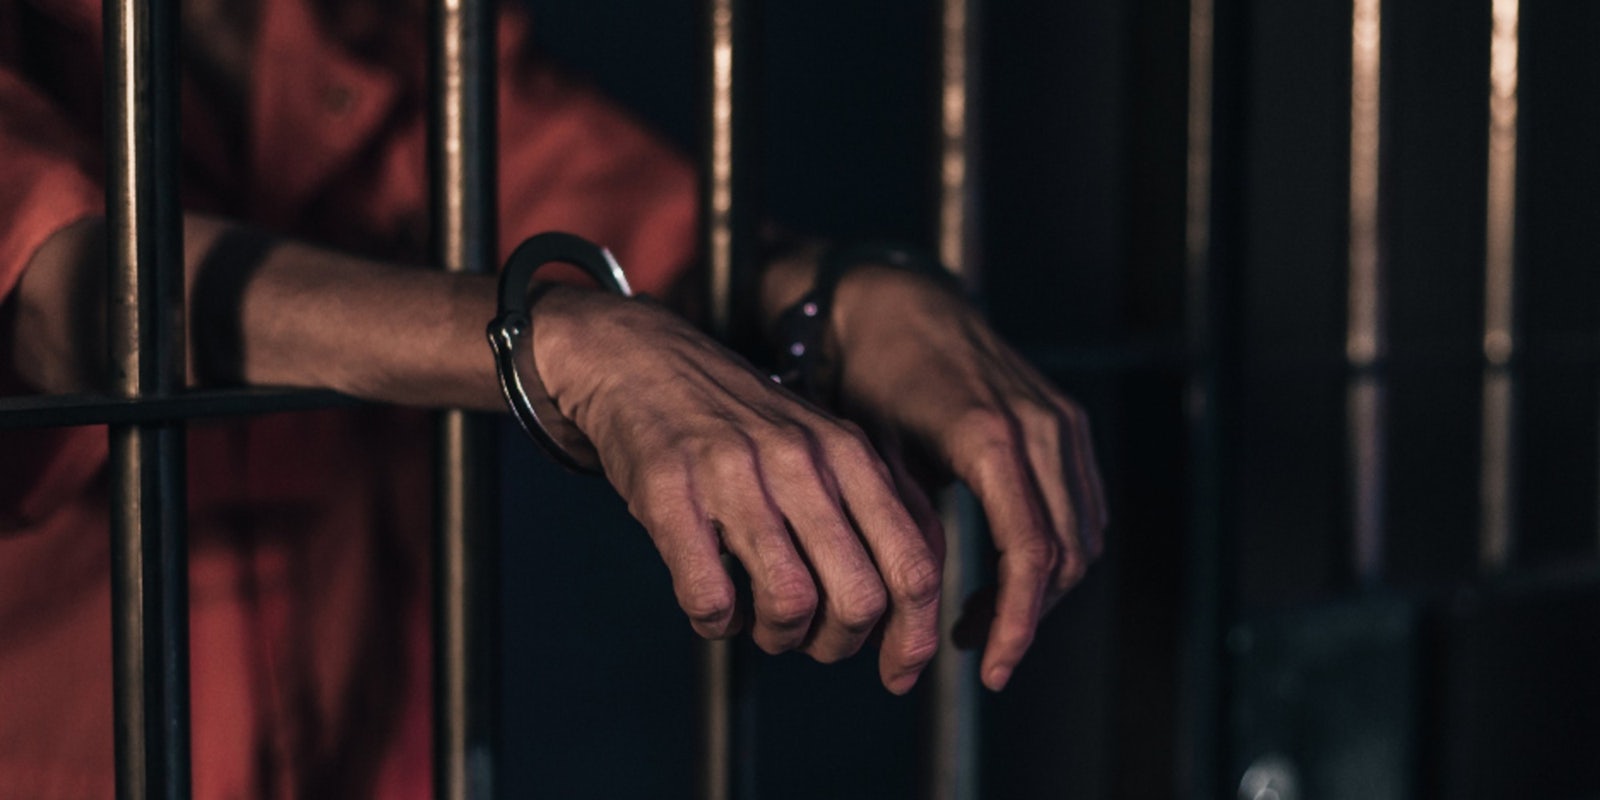 A person in handcuffs behind bars